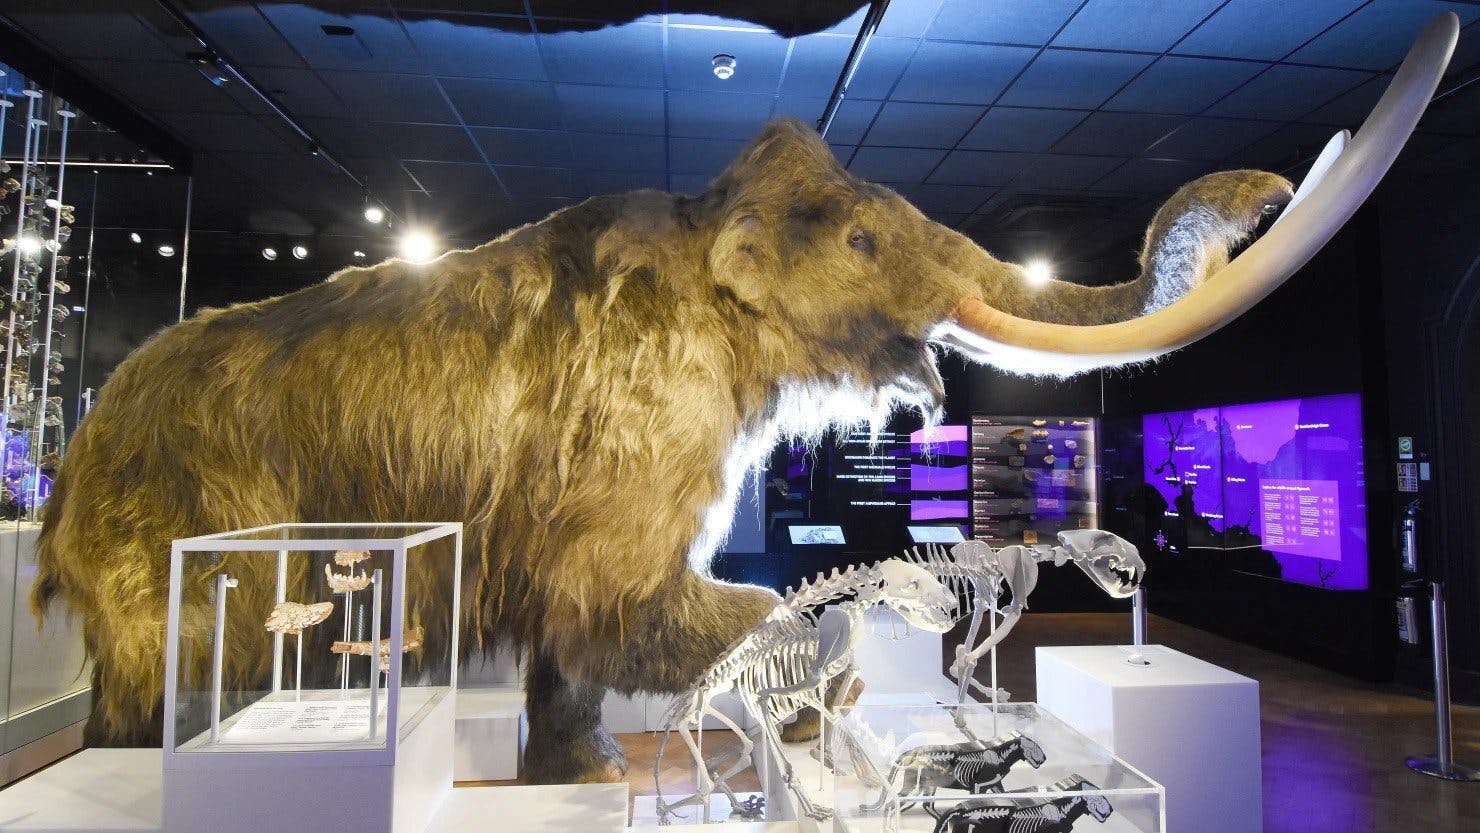 Mildred The Mammoth at The Box Plymouth